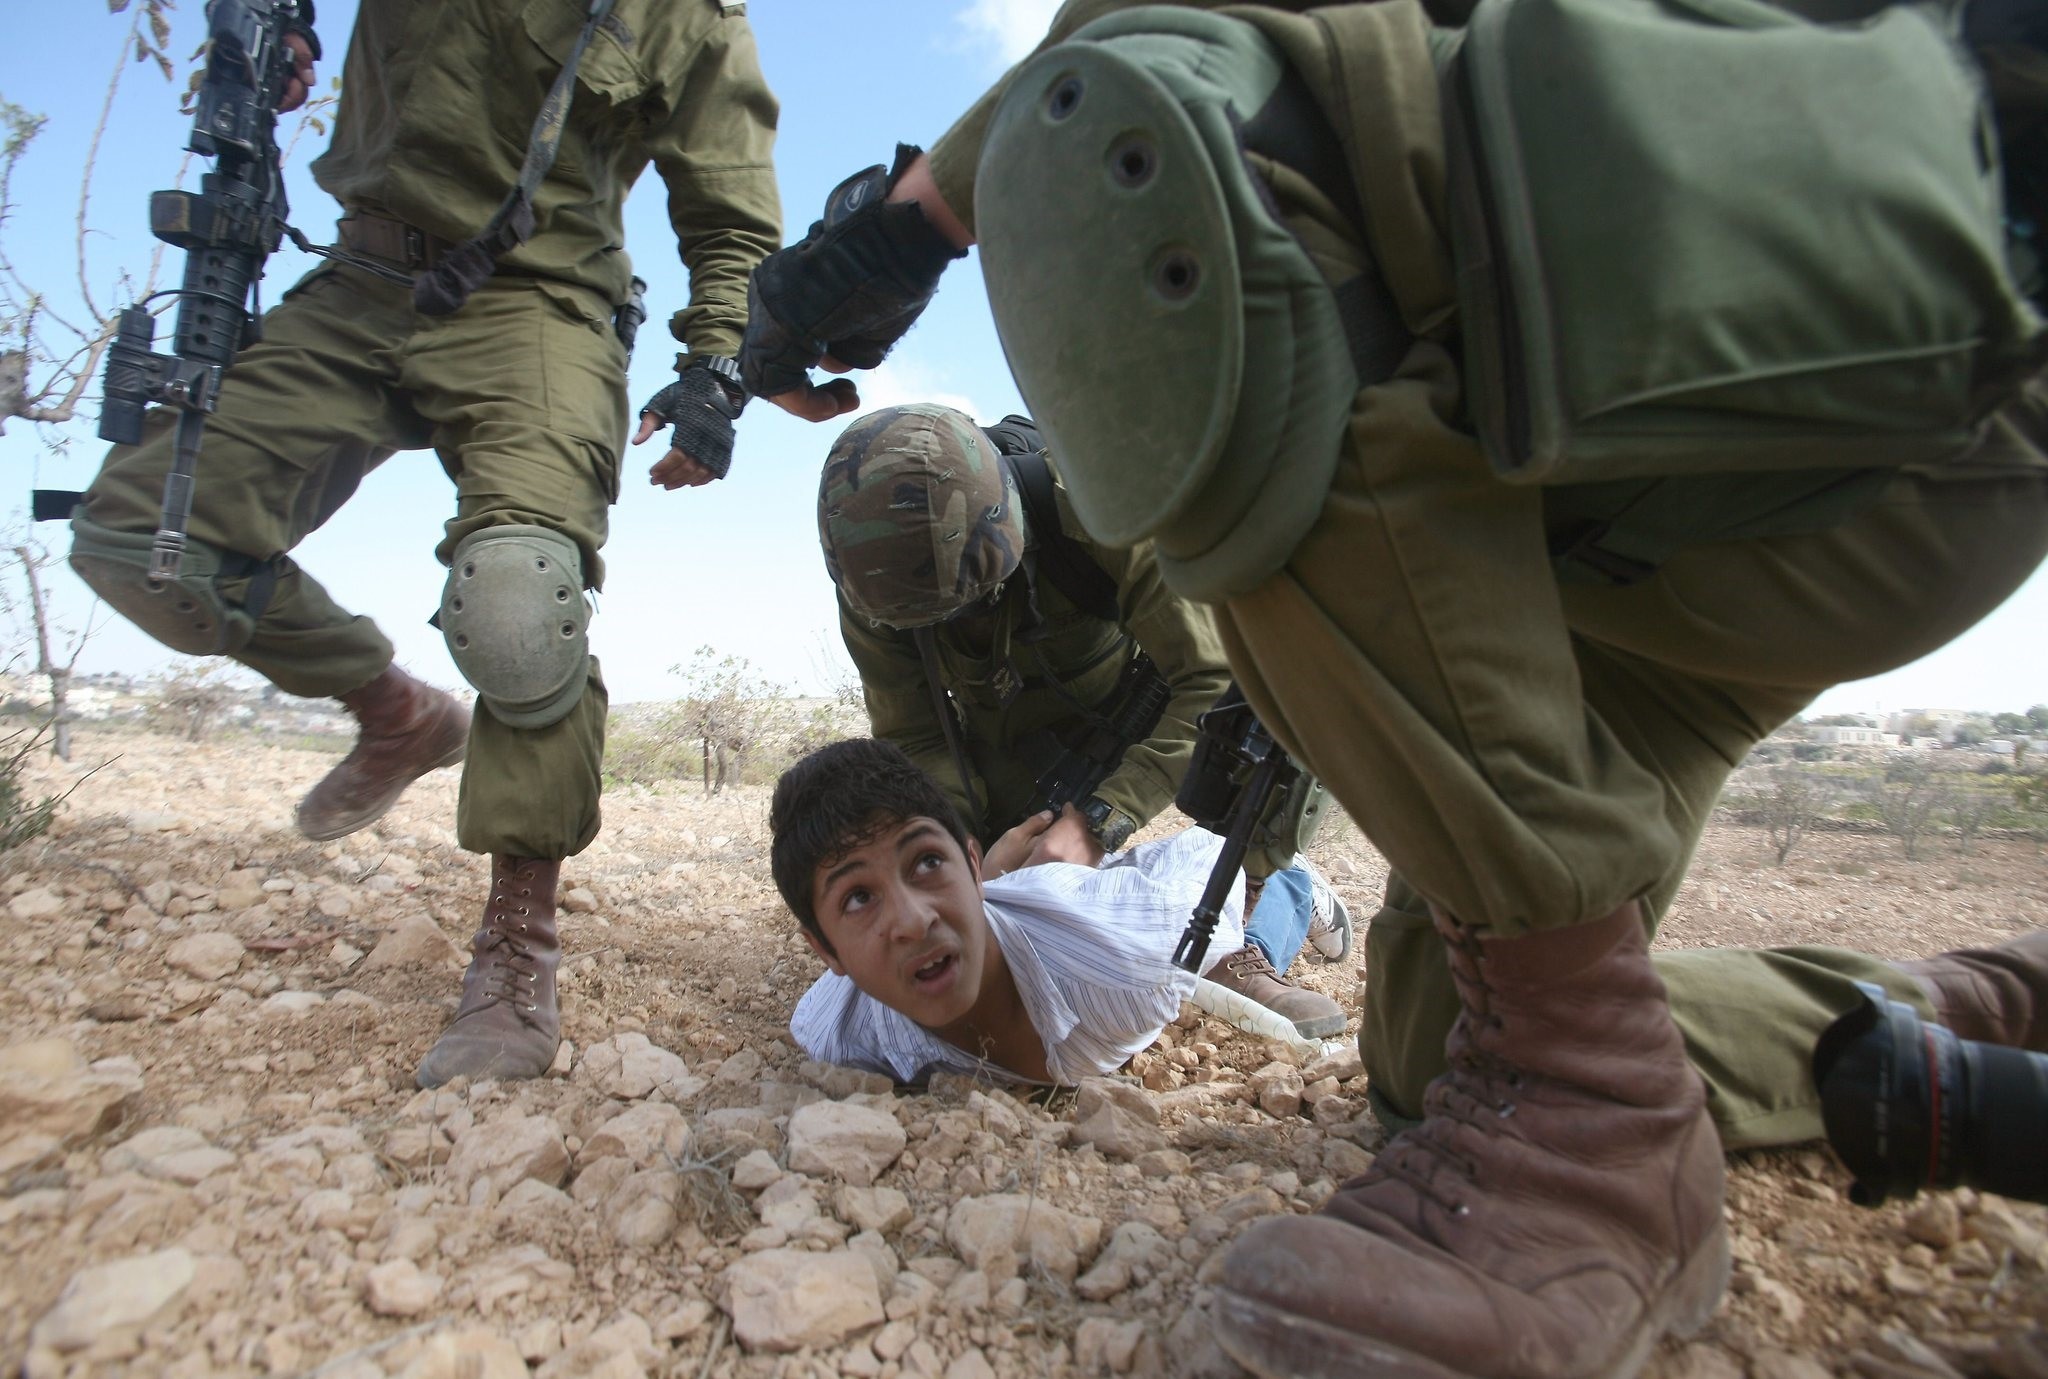 An October 23, 2010 file photo shows Palestinian youth is arrested by Israeli soldiers. (AFP Photo)